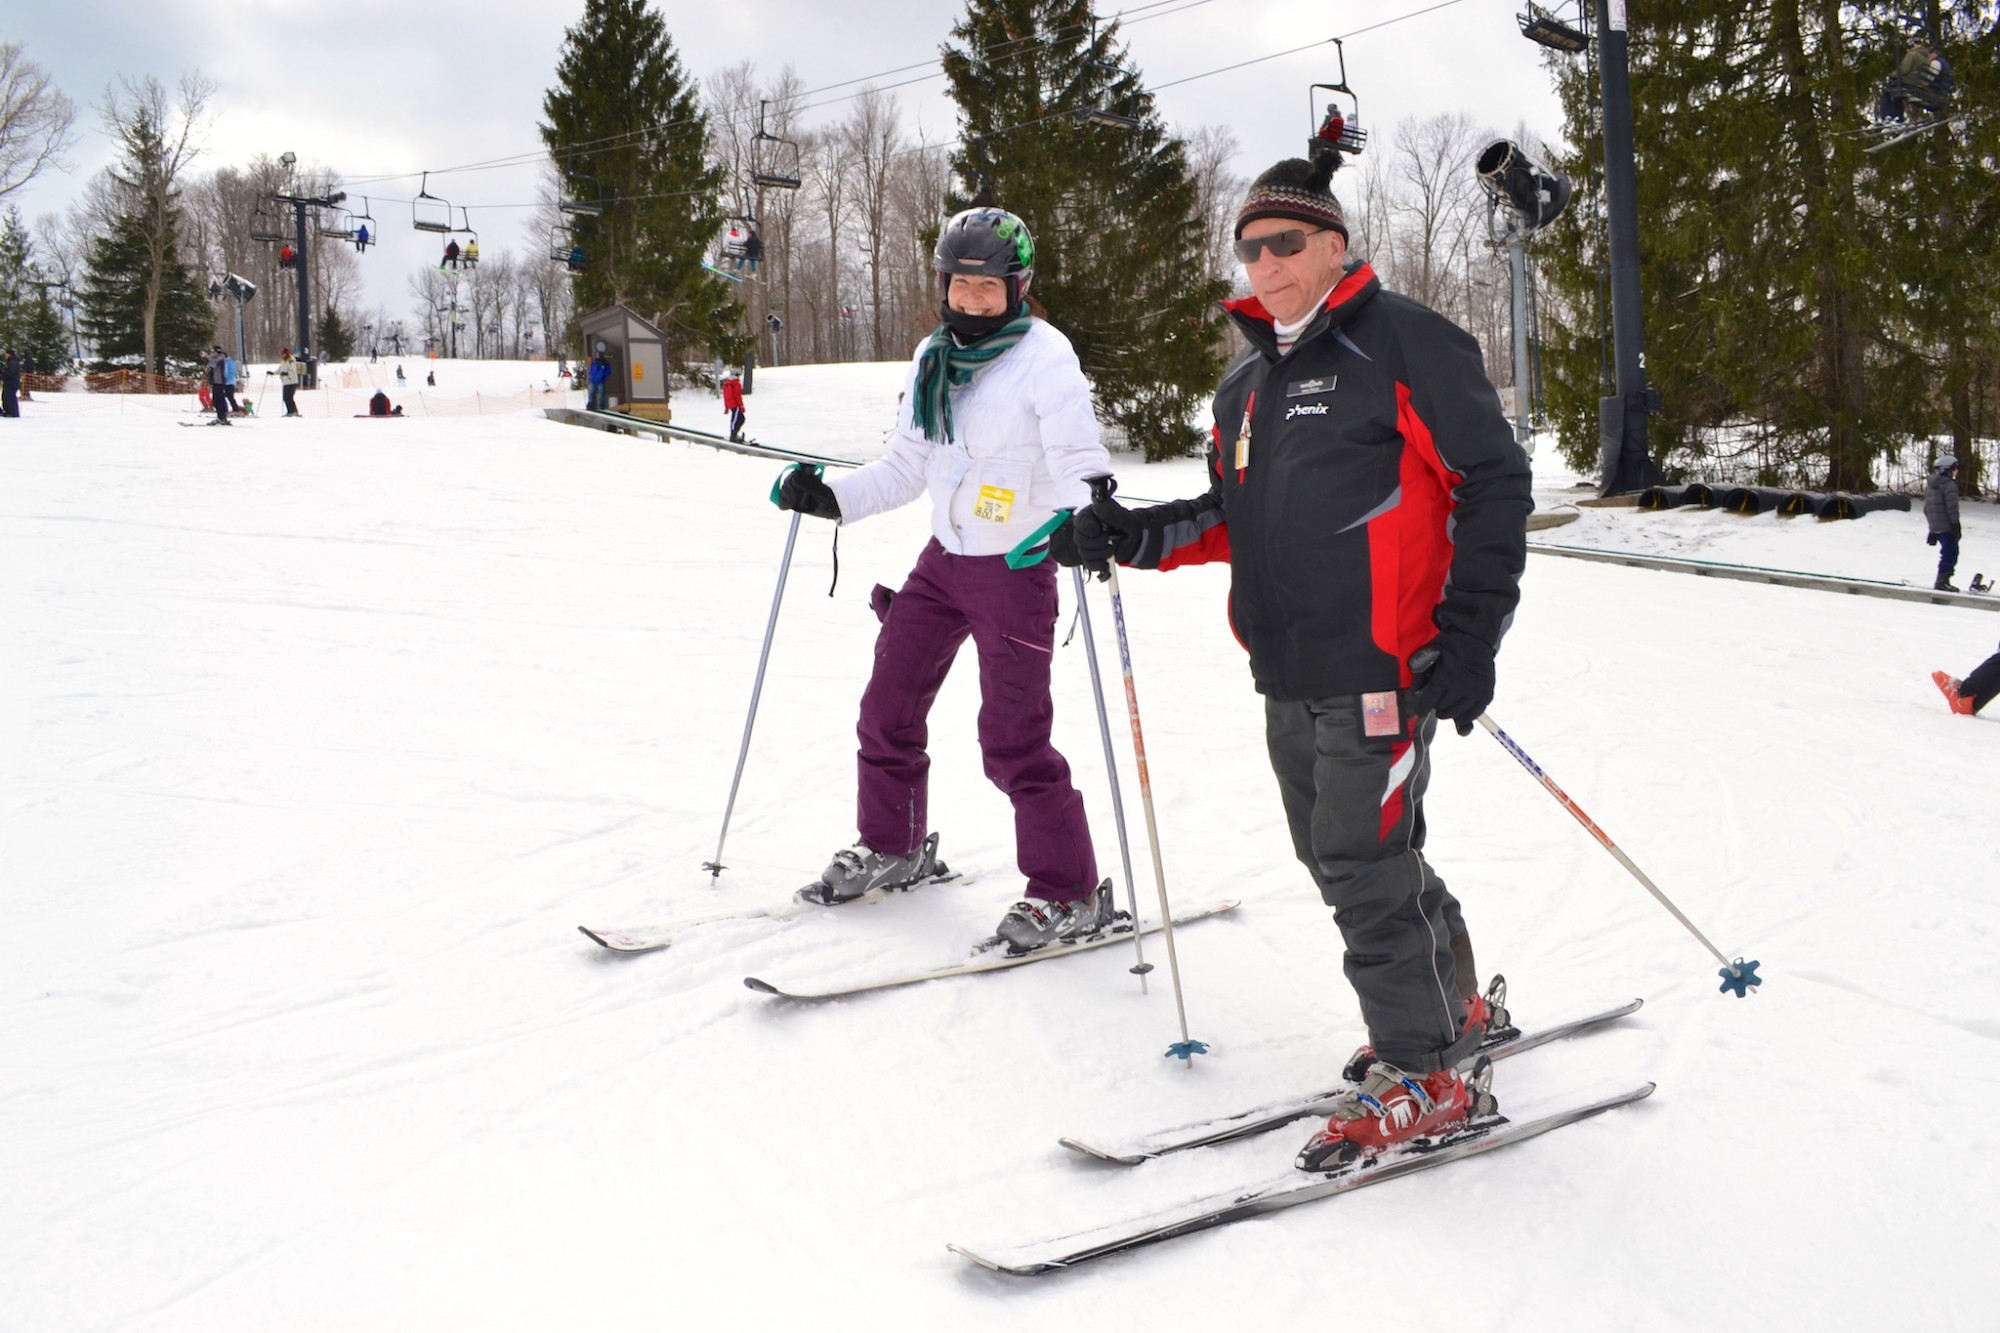 Learning to Ski Made Easy at Snow Trails